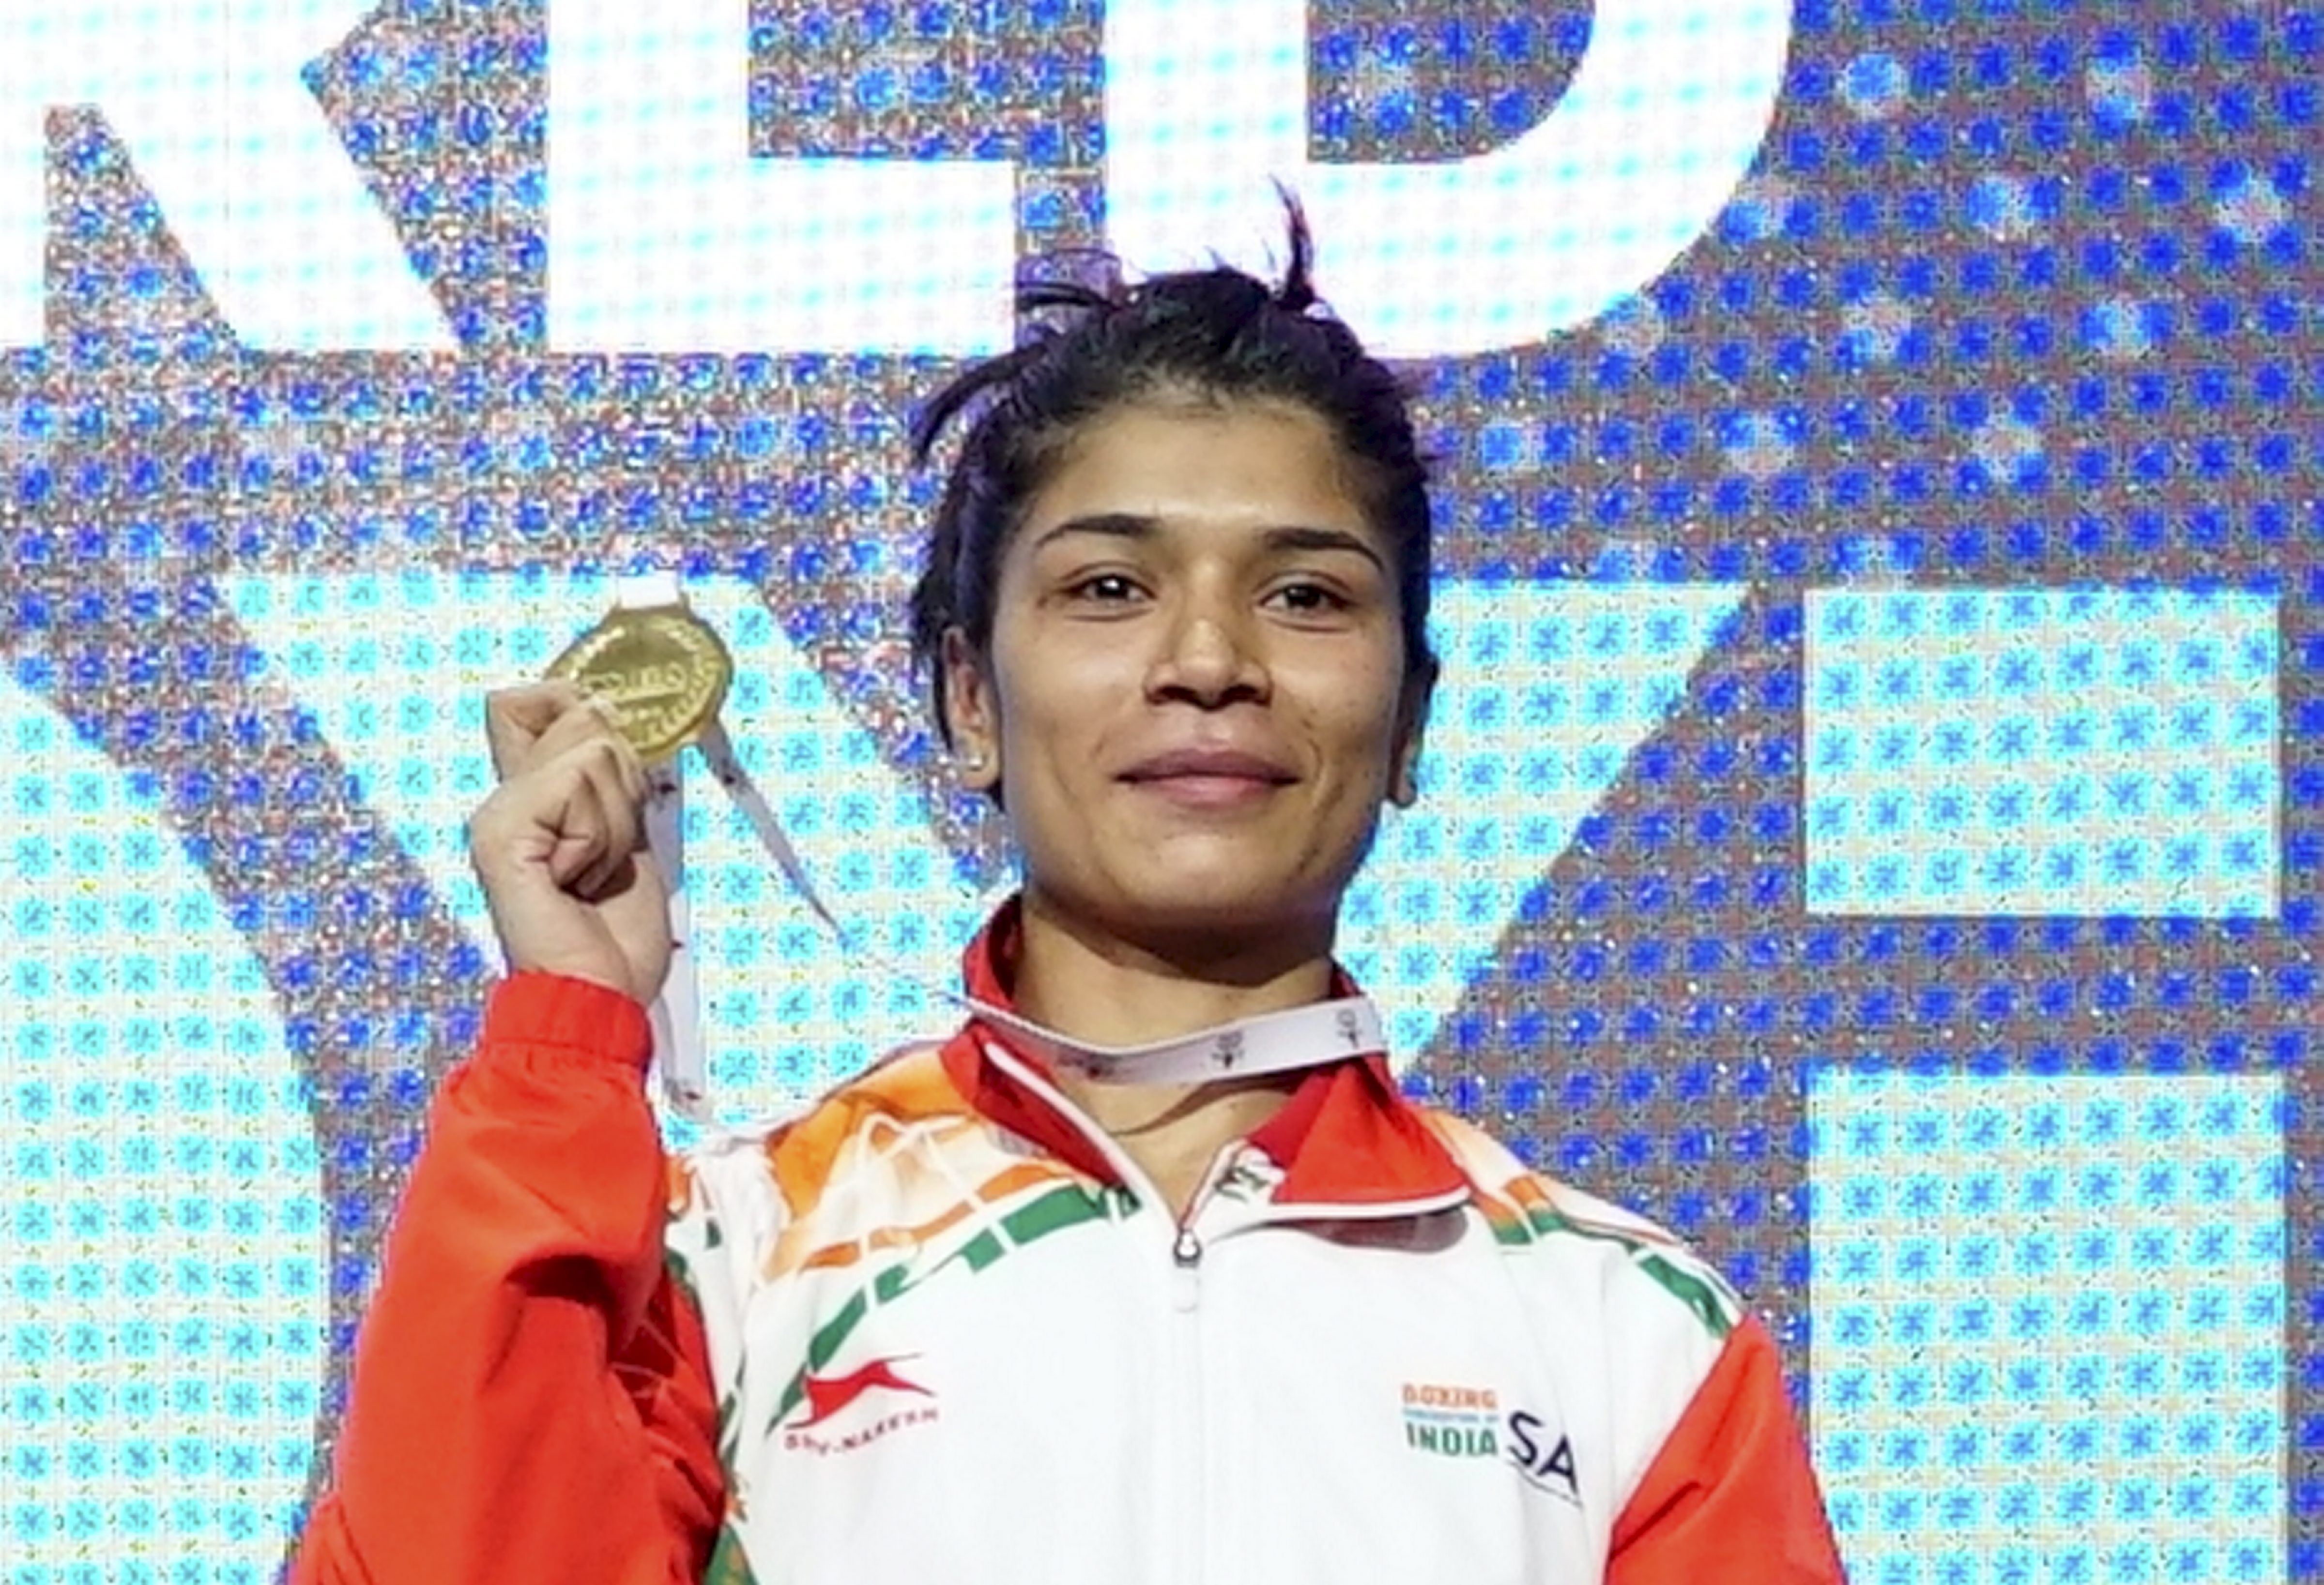 Tale of Nikhat Zareen’s resilience: From requesting ‘fair trial’ to becoming world champion